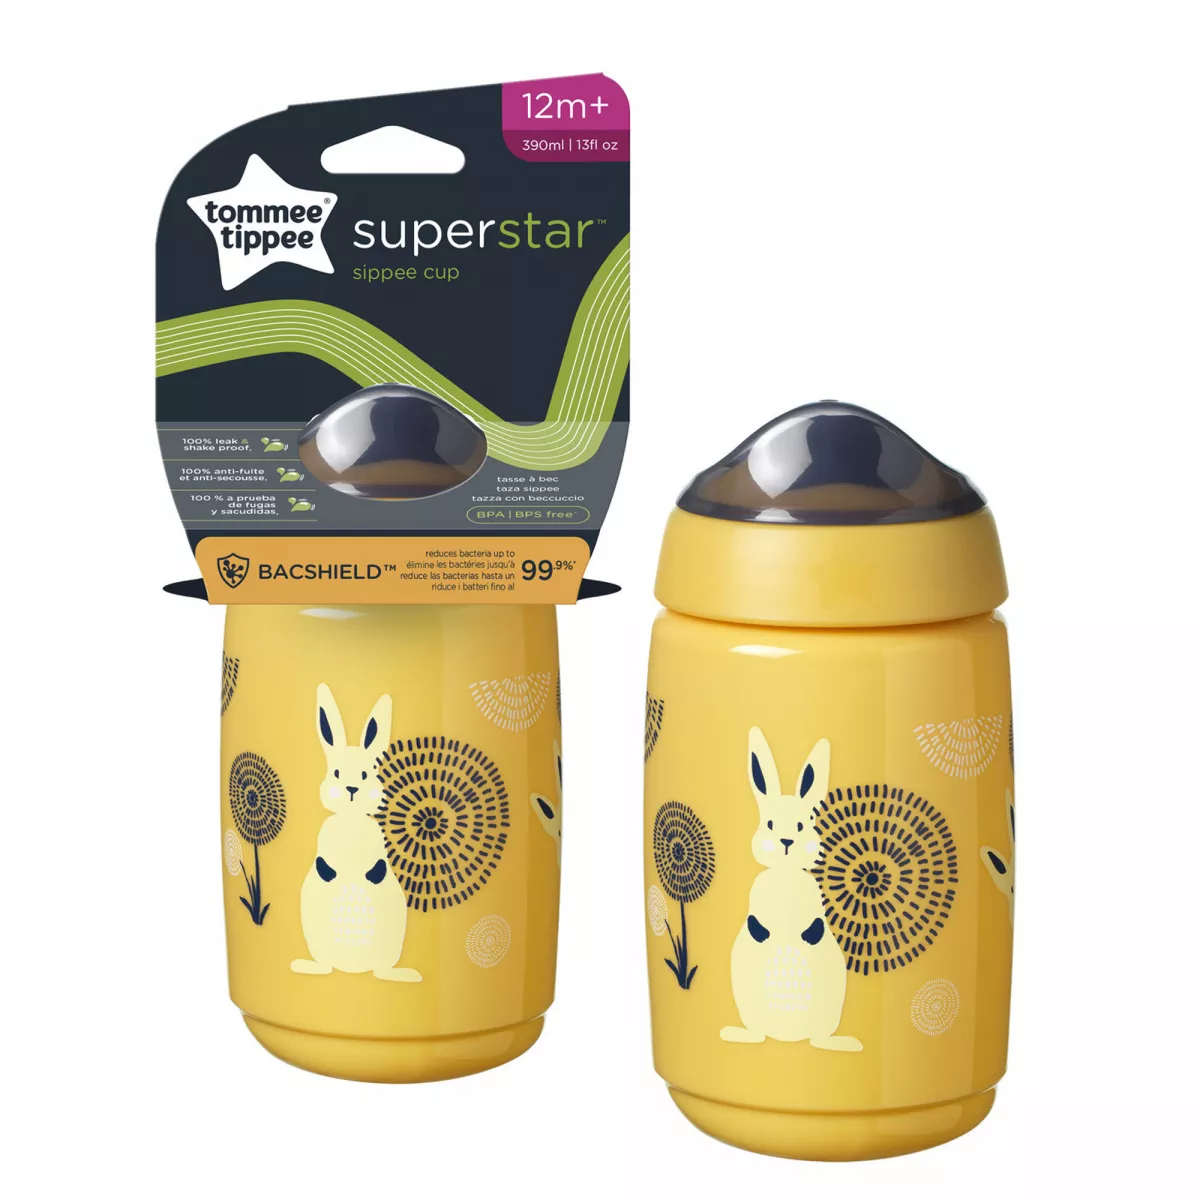 Cana Tommee Tippee Sippee cu protectie BACSHIELD si capac, 390 ml, 12 luni +, Galben, 1 buc, [],drogheriemb.ro